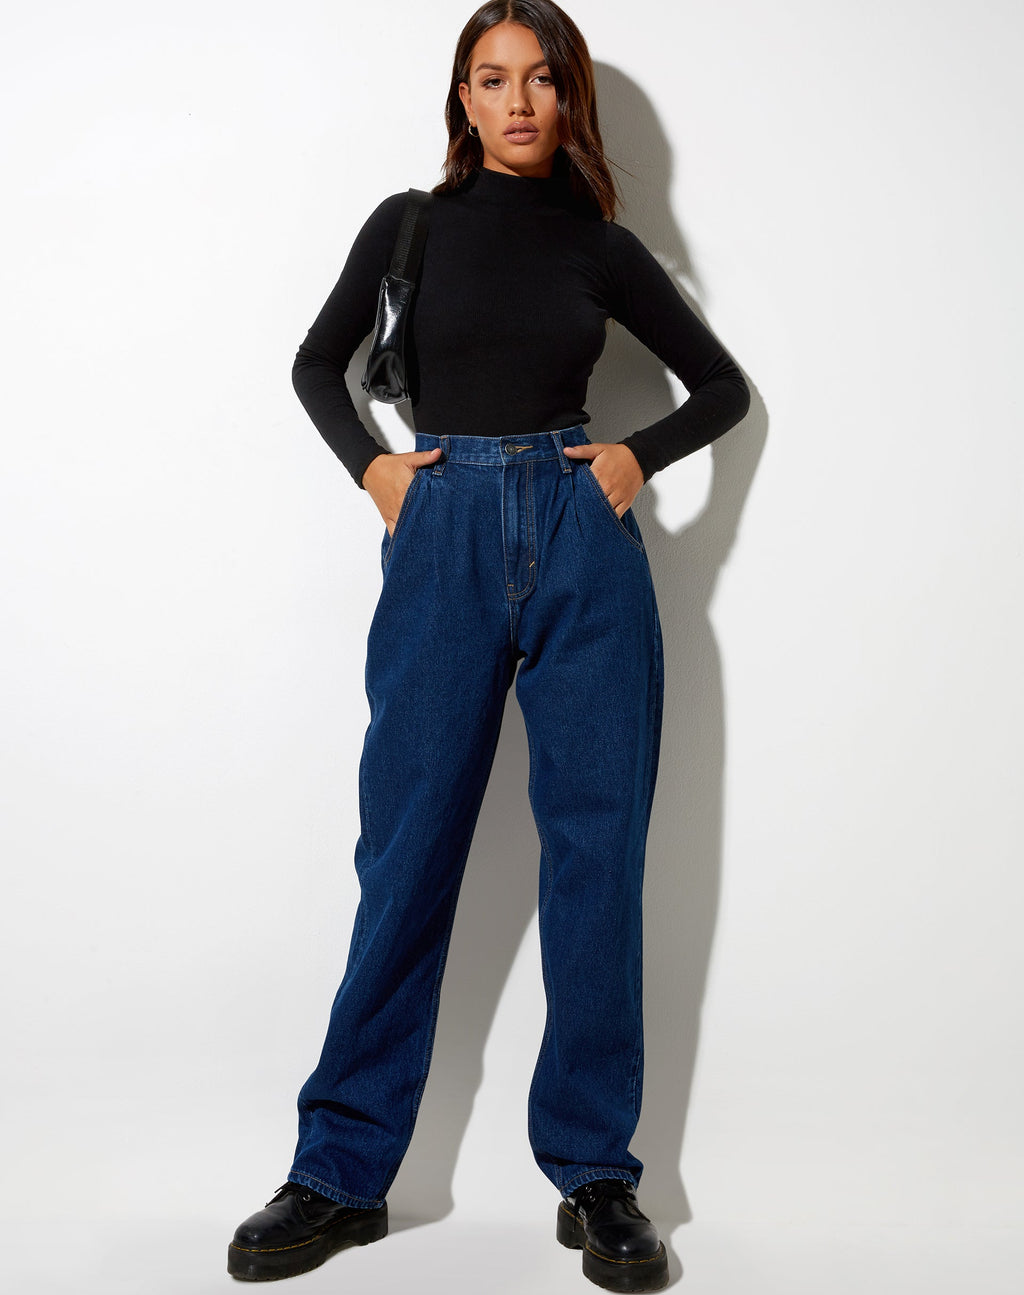 Pleated Jeans in Indigo Blue